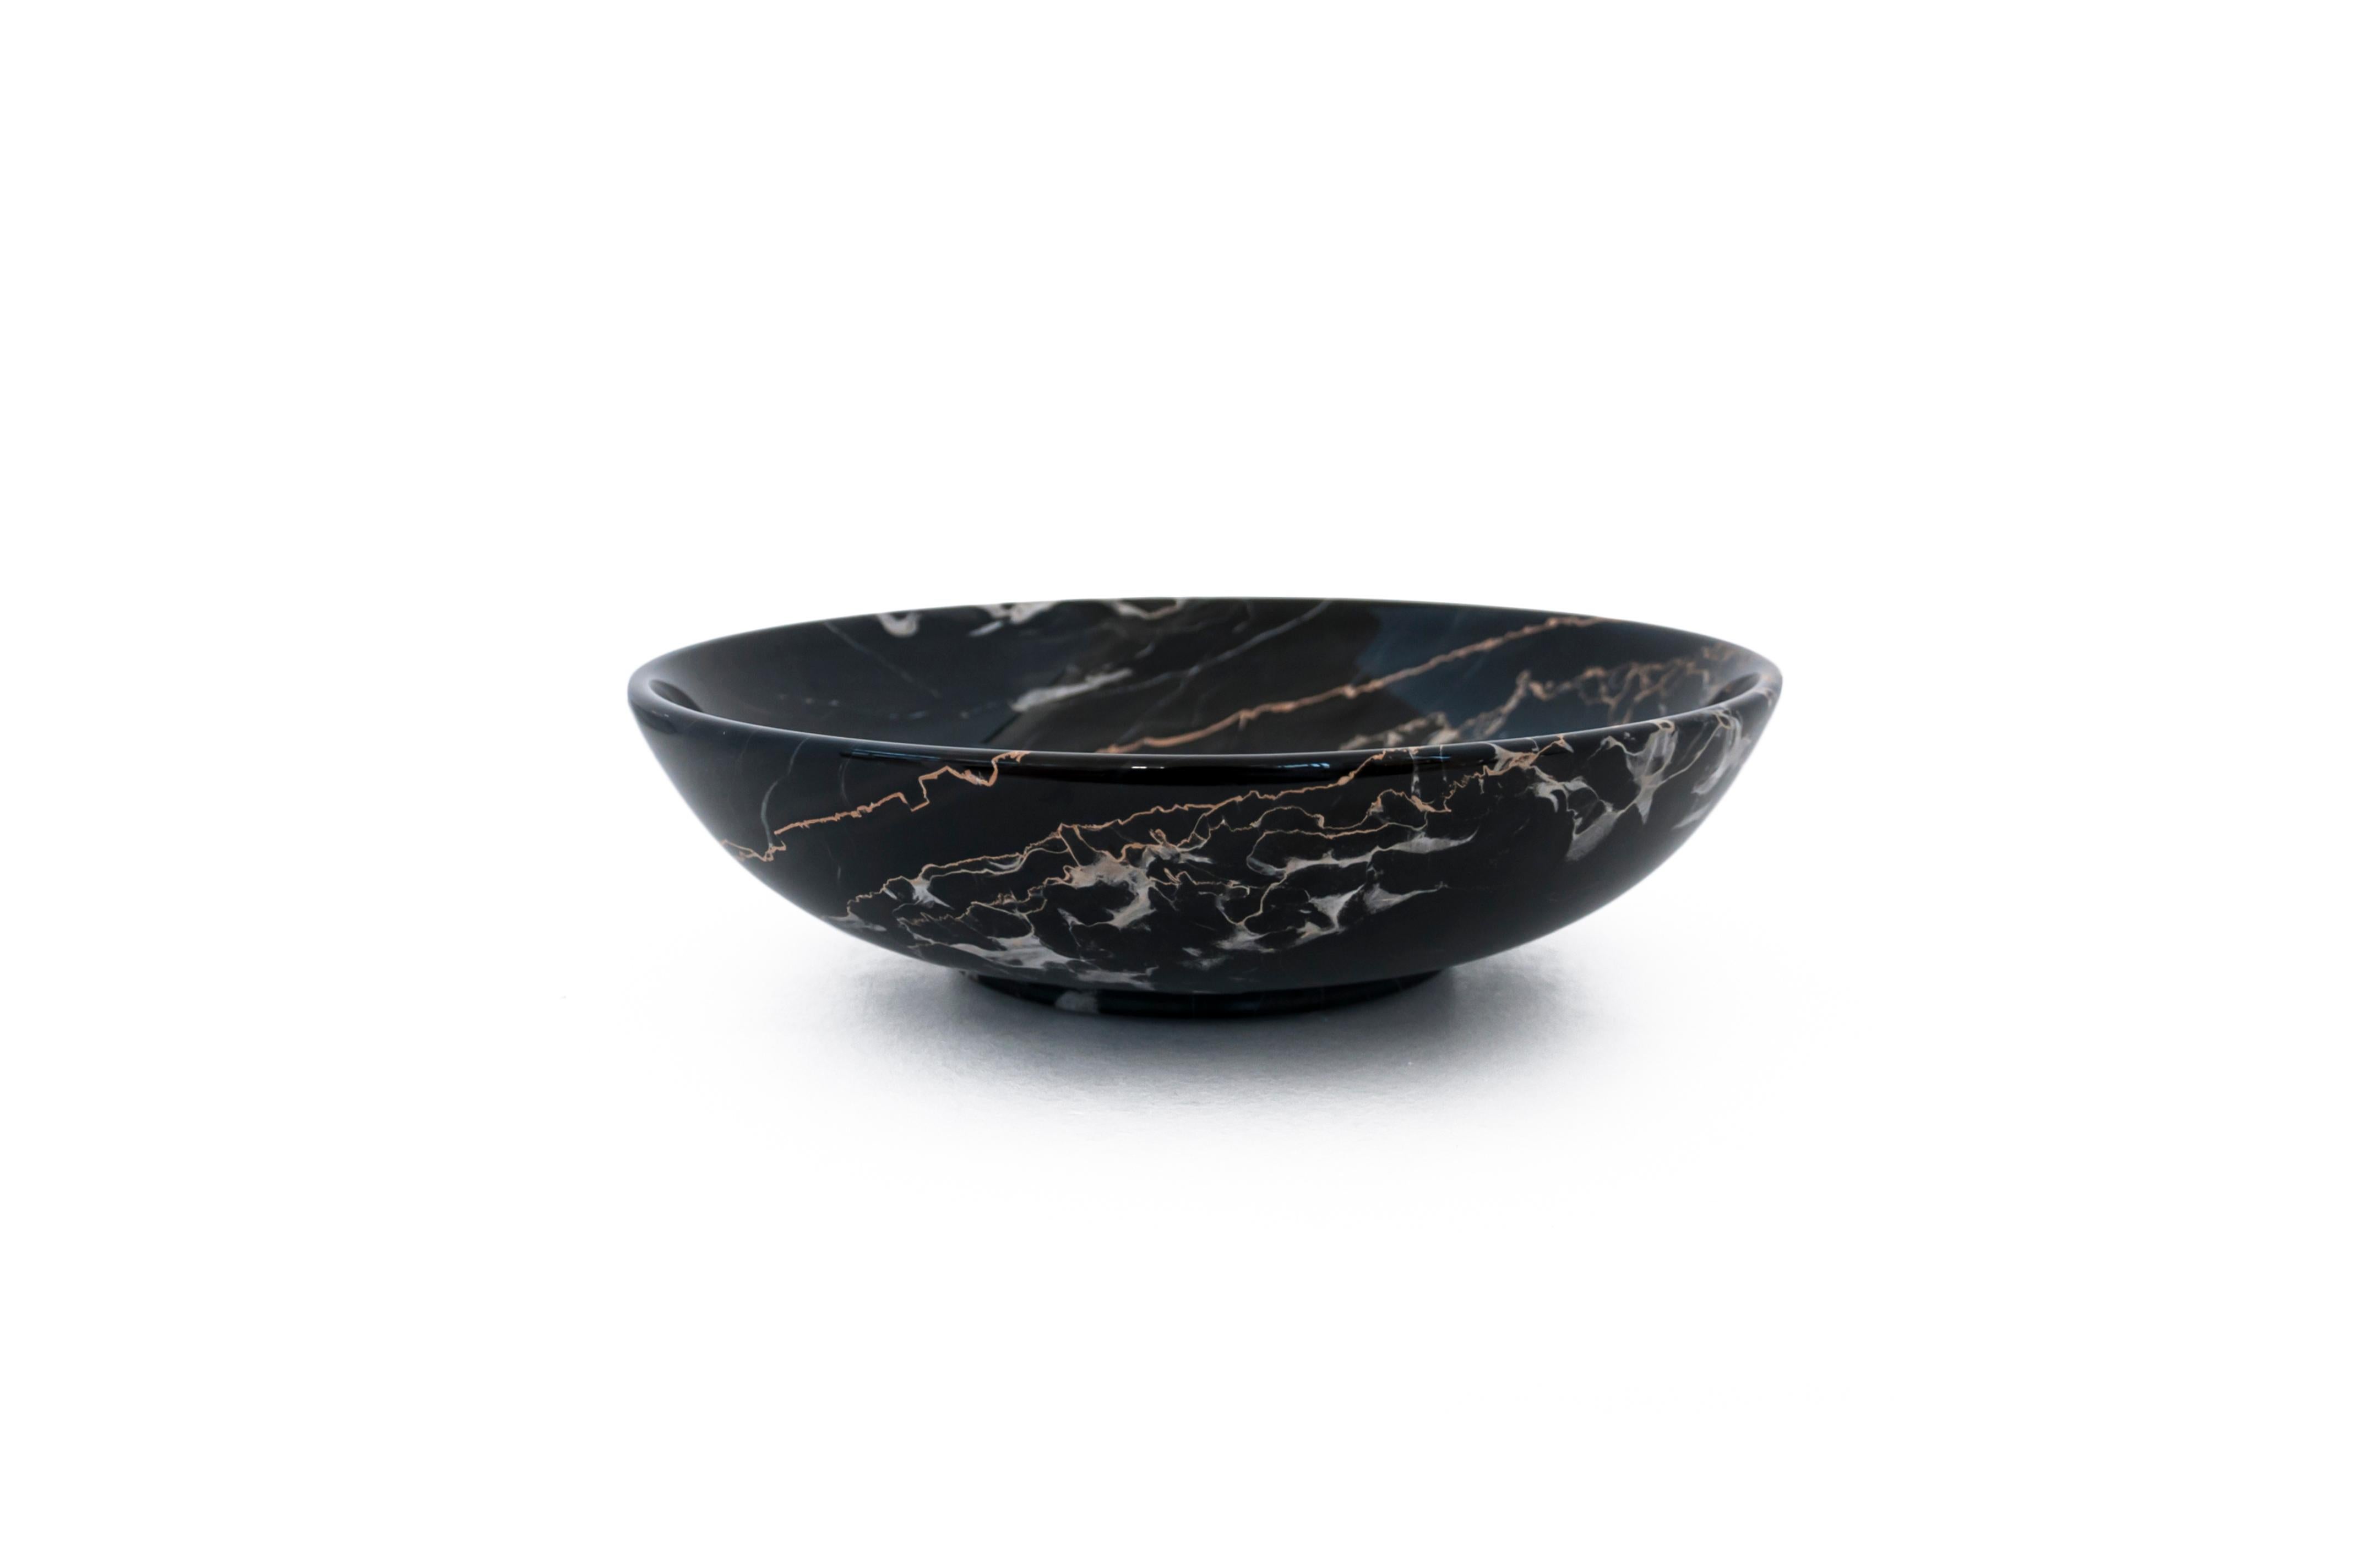 Small fruit bowl in Portoro marble, extracted and processed in Italy. You have a 100% made in Italy product.
It is ideal for fruit and to present food.
Each piece is in a way unique (since each marble block is different in veins and shades) and